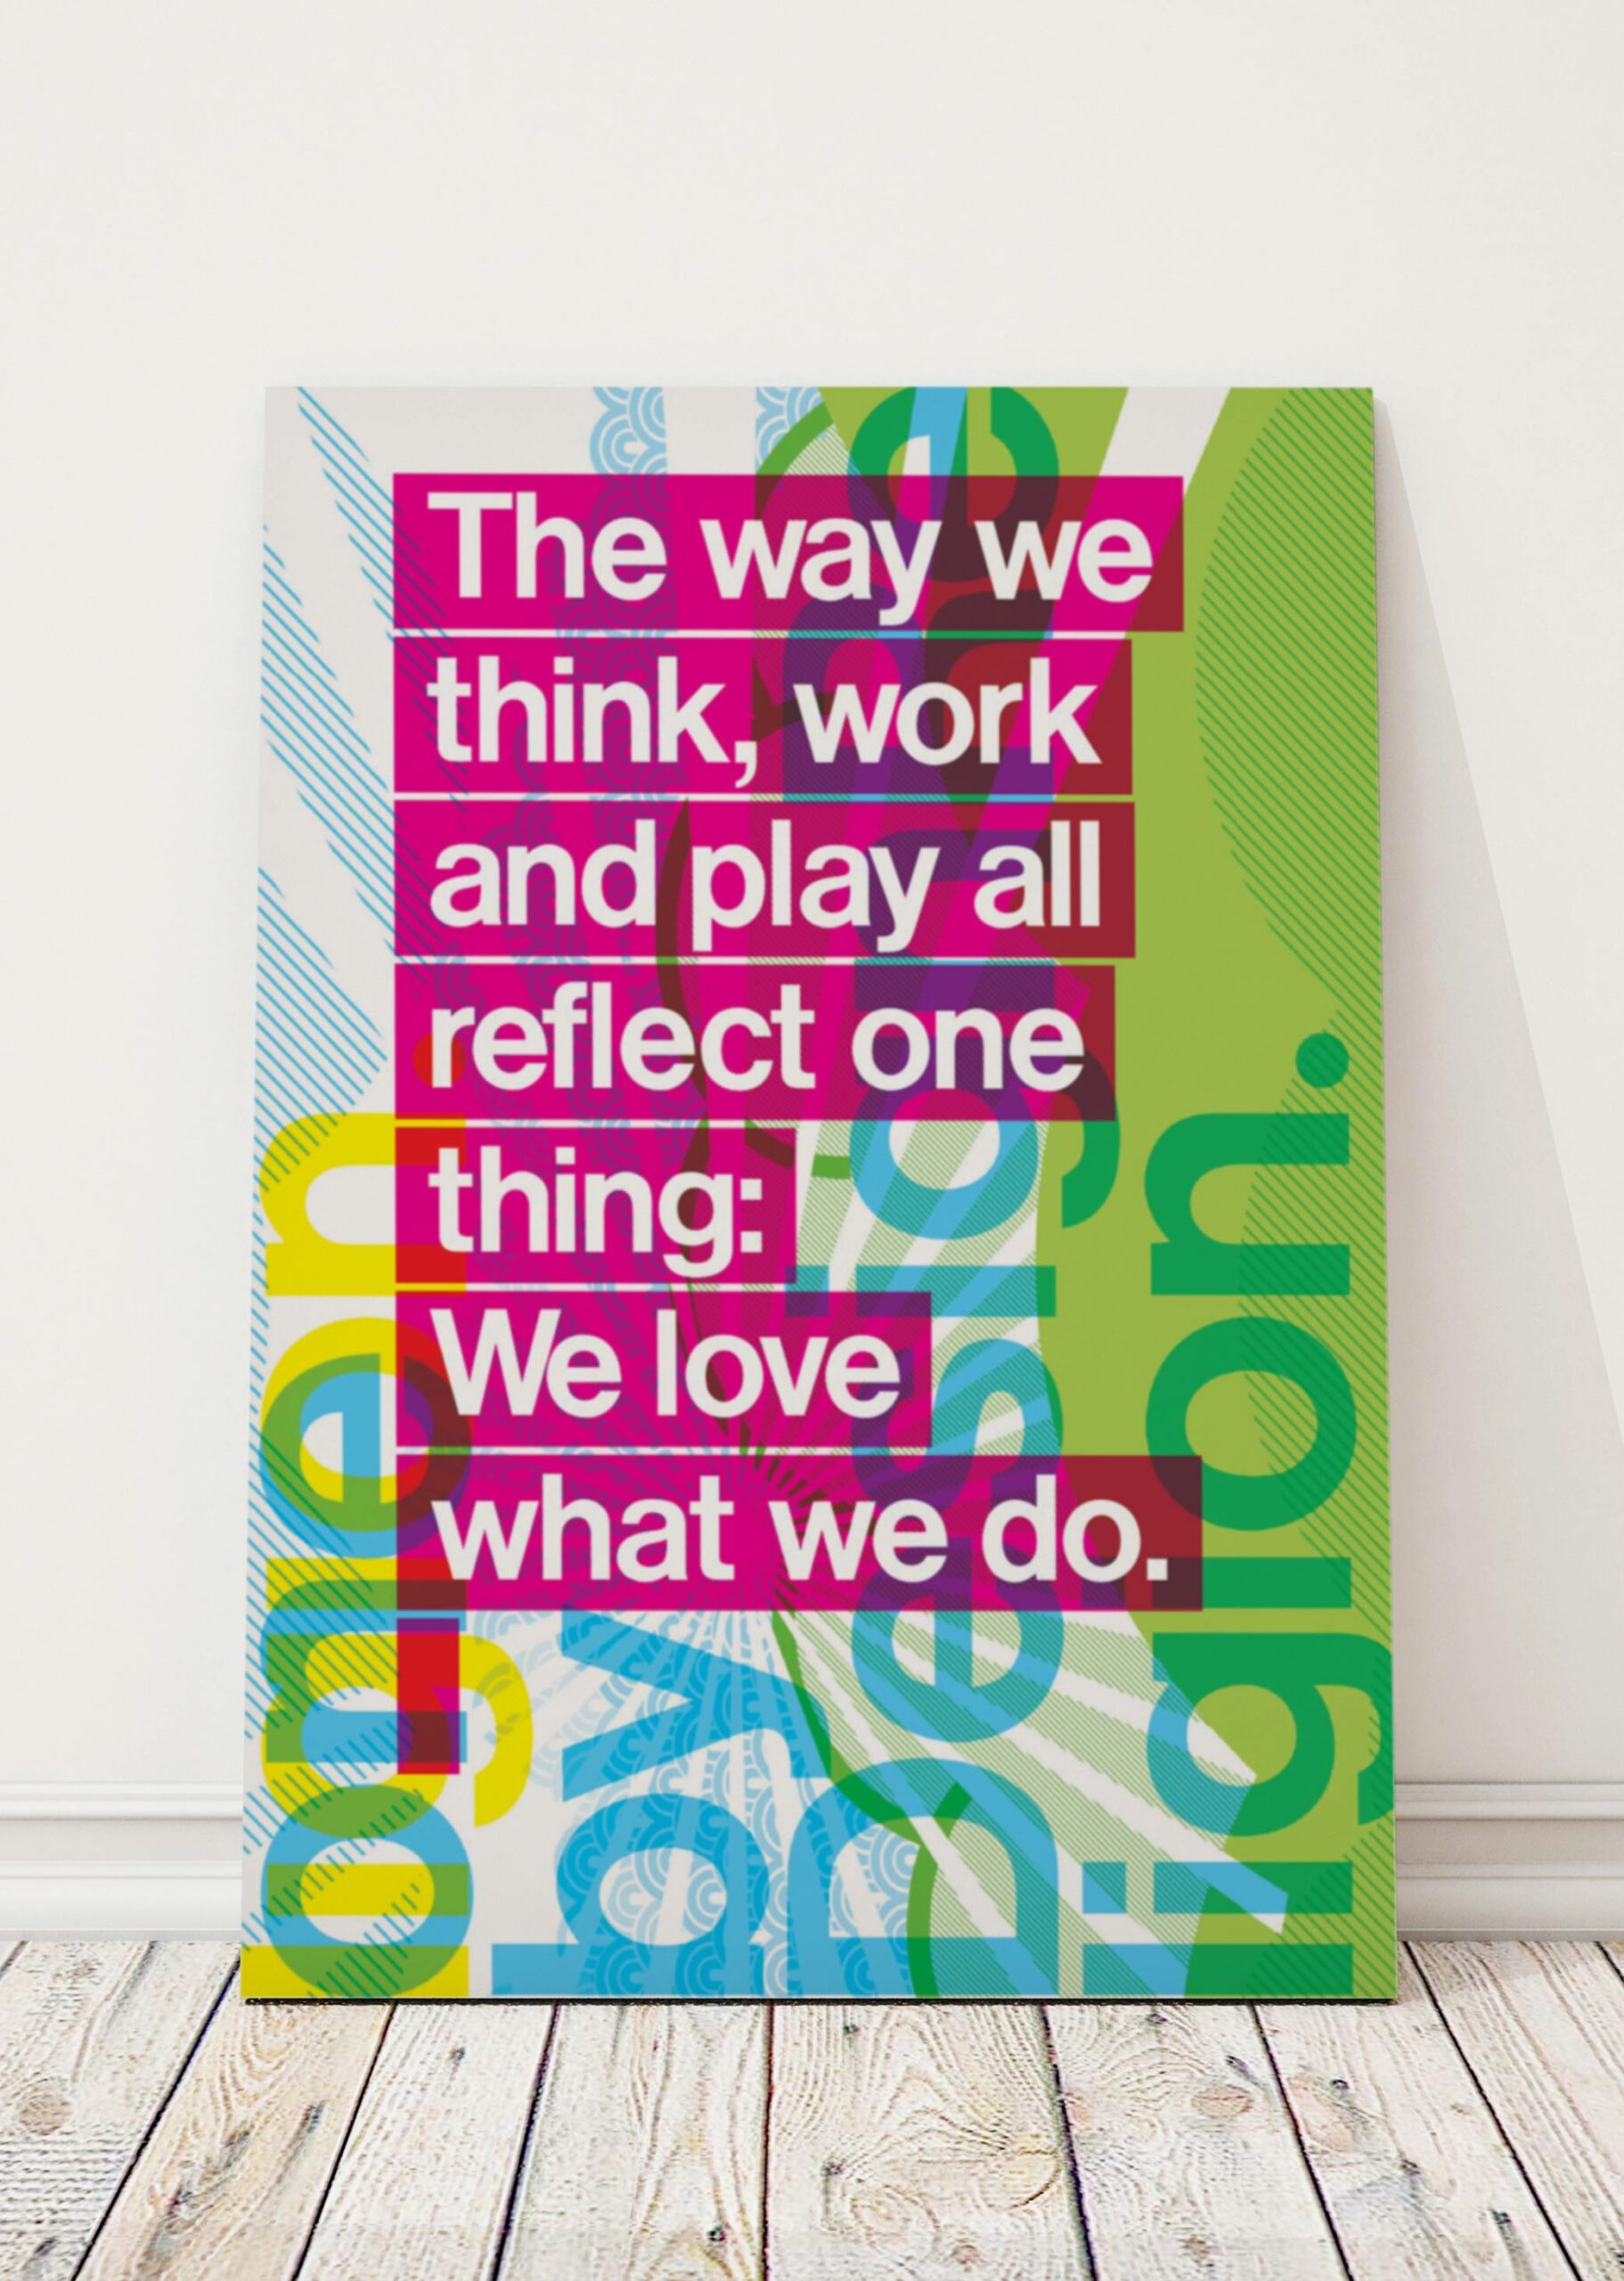 Creative poster using the phrase, The way we think, work and play all reflect one thing: we love what we do